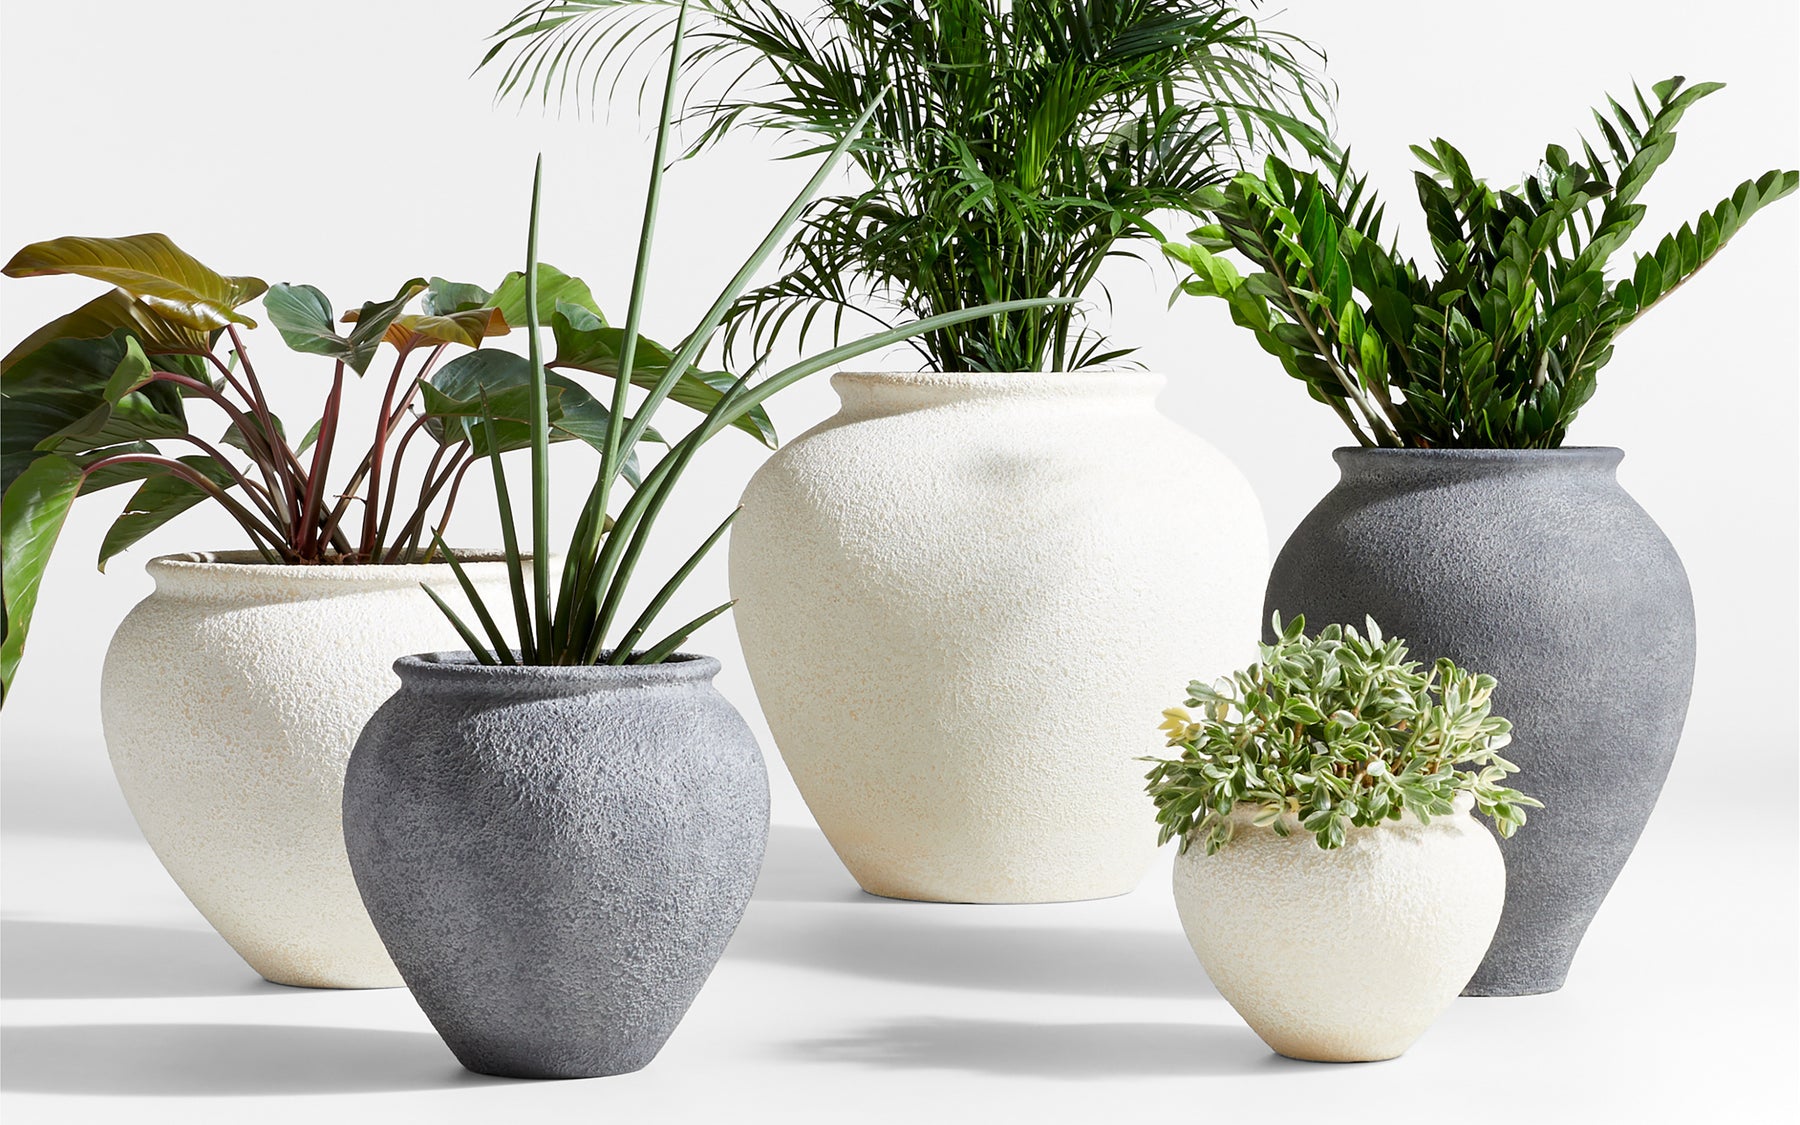 A Green Thumb's Guide to Choosing the Perfect Planters